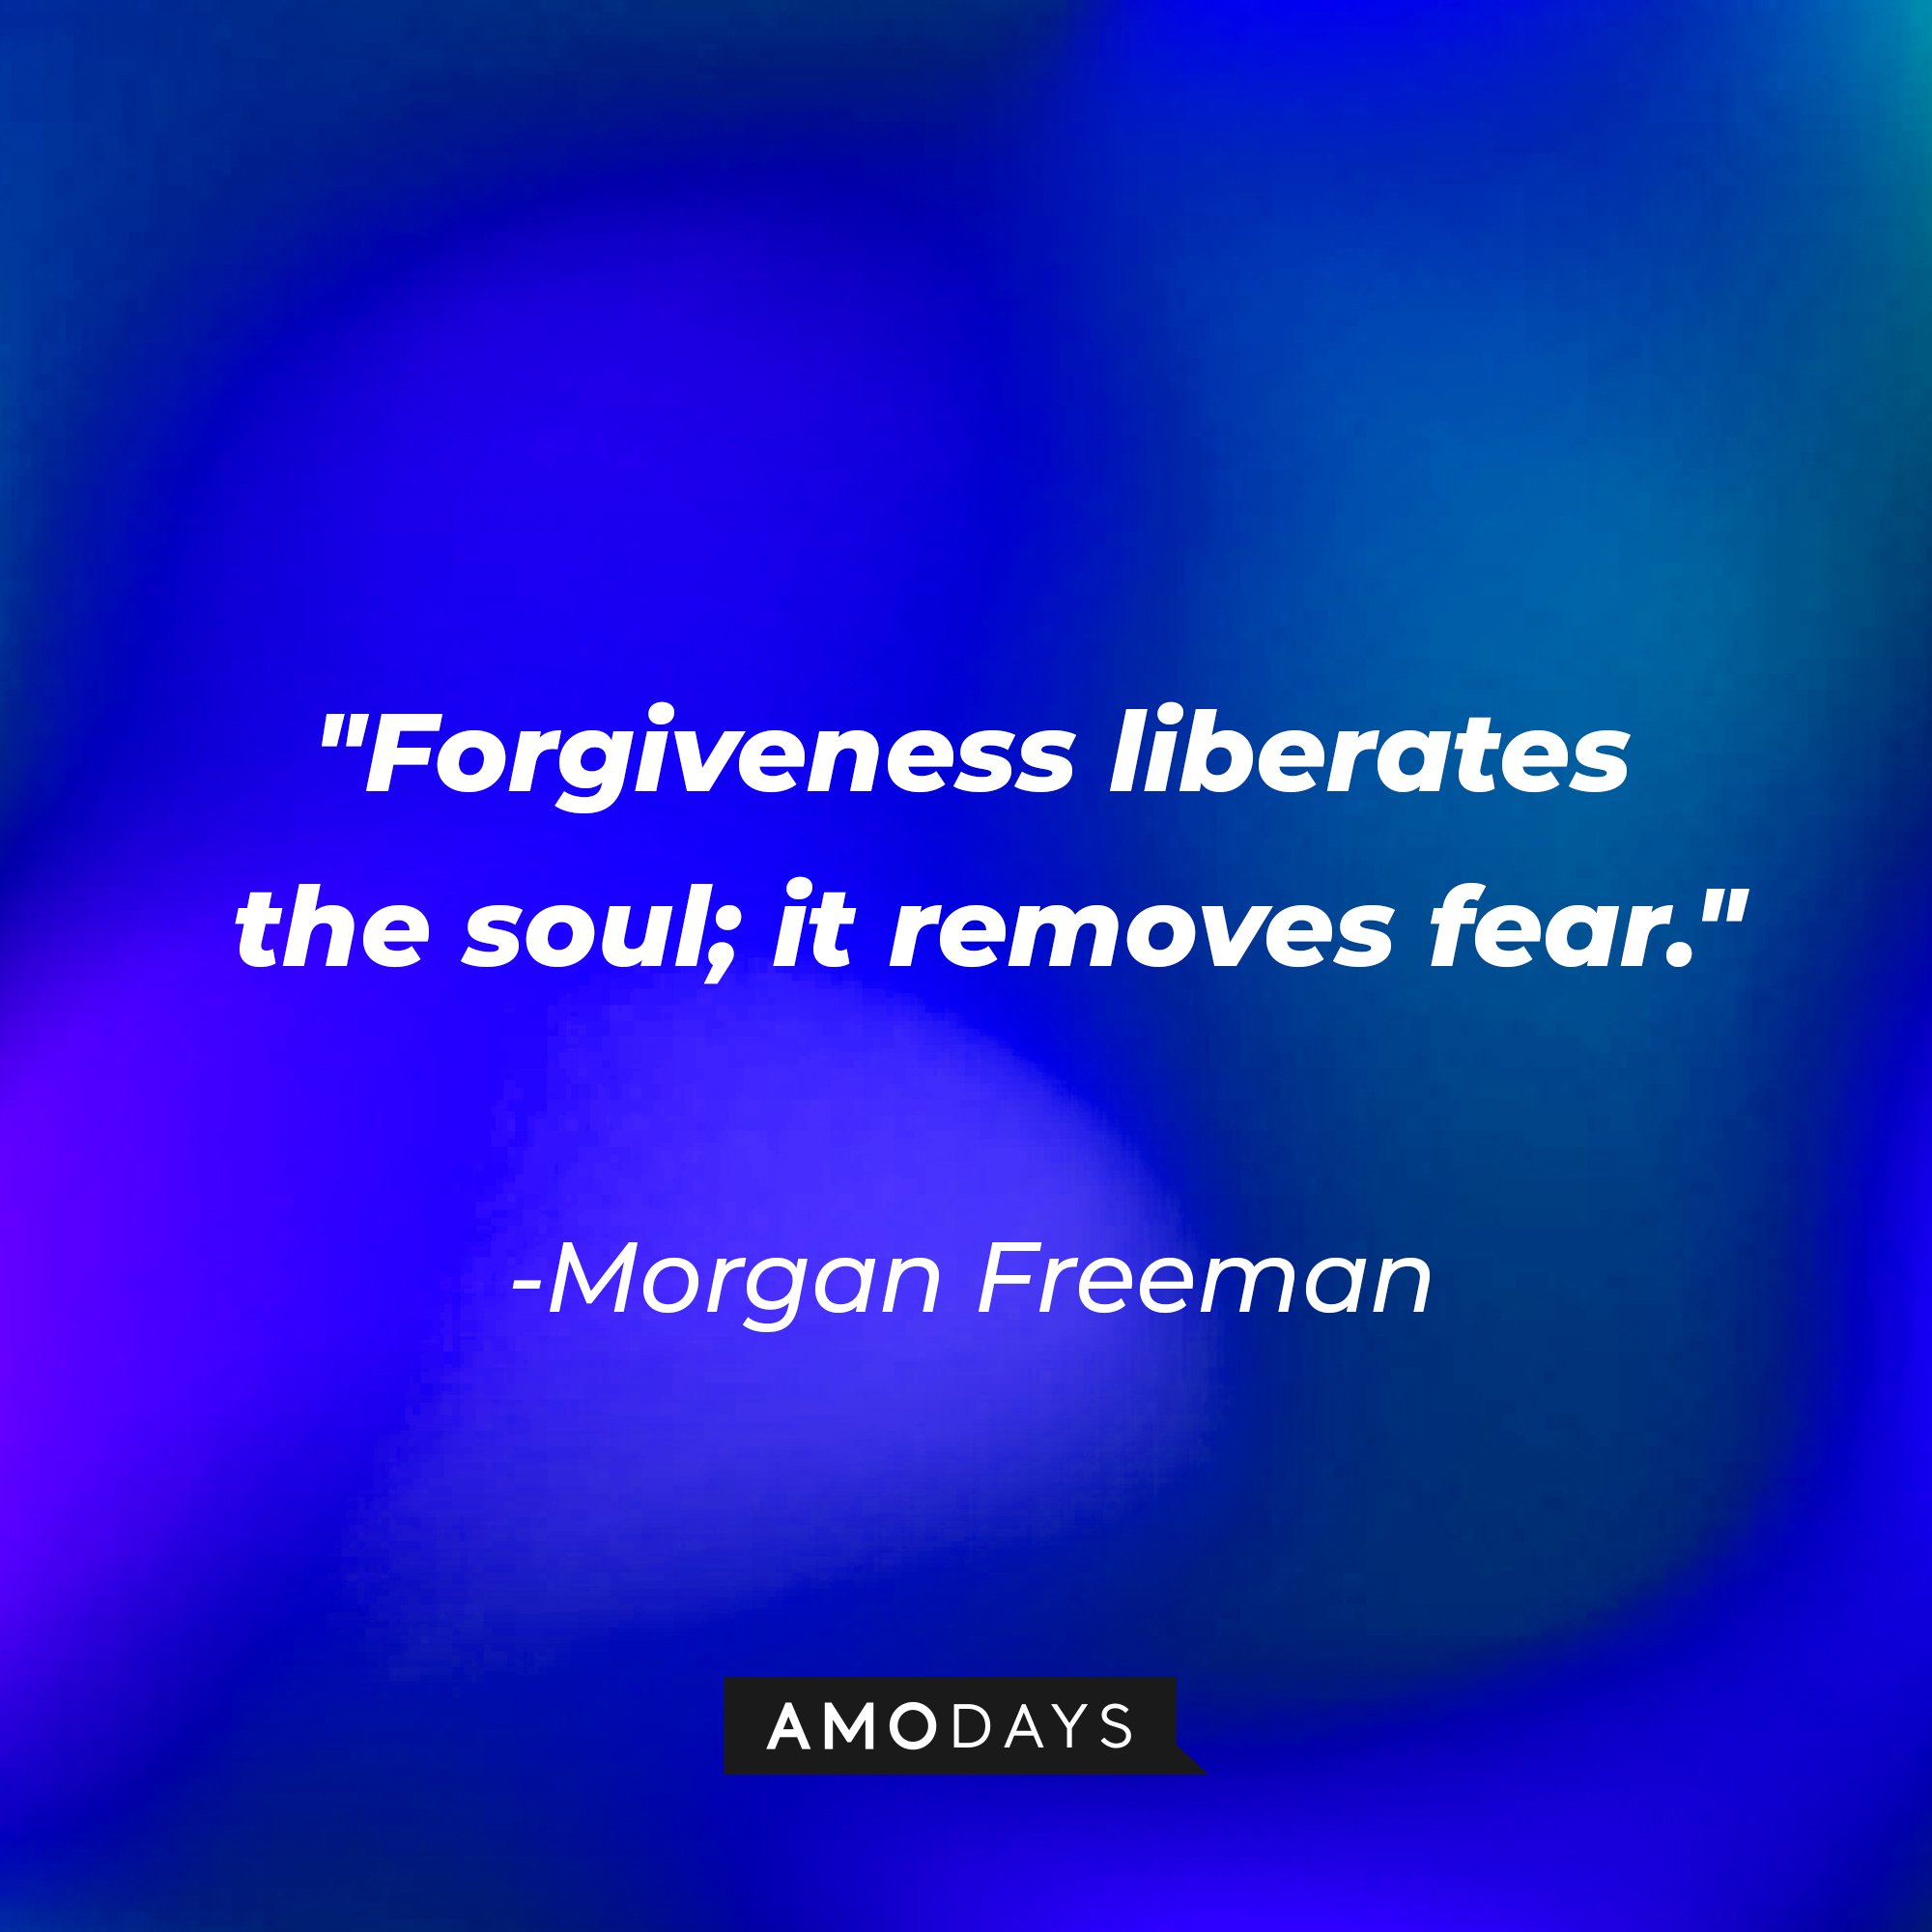  Morgan Freeman's quote: "Forgiveness liberates the soul; it removes fear." | Image: AmoDays